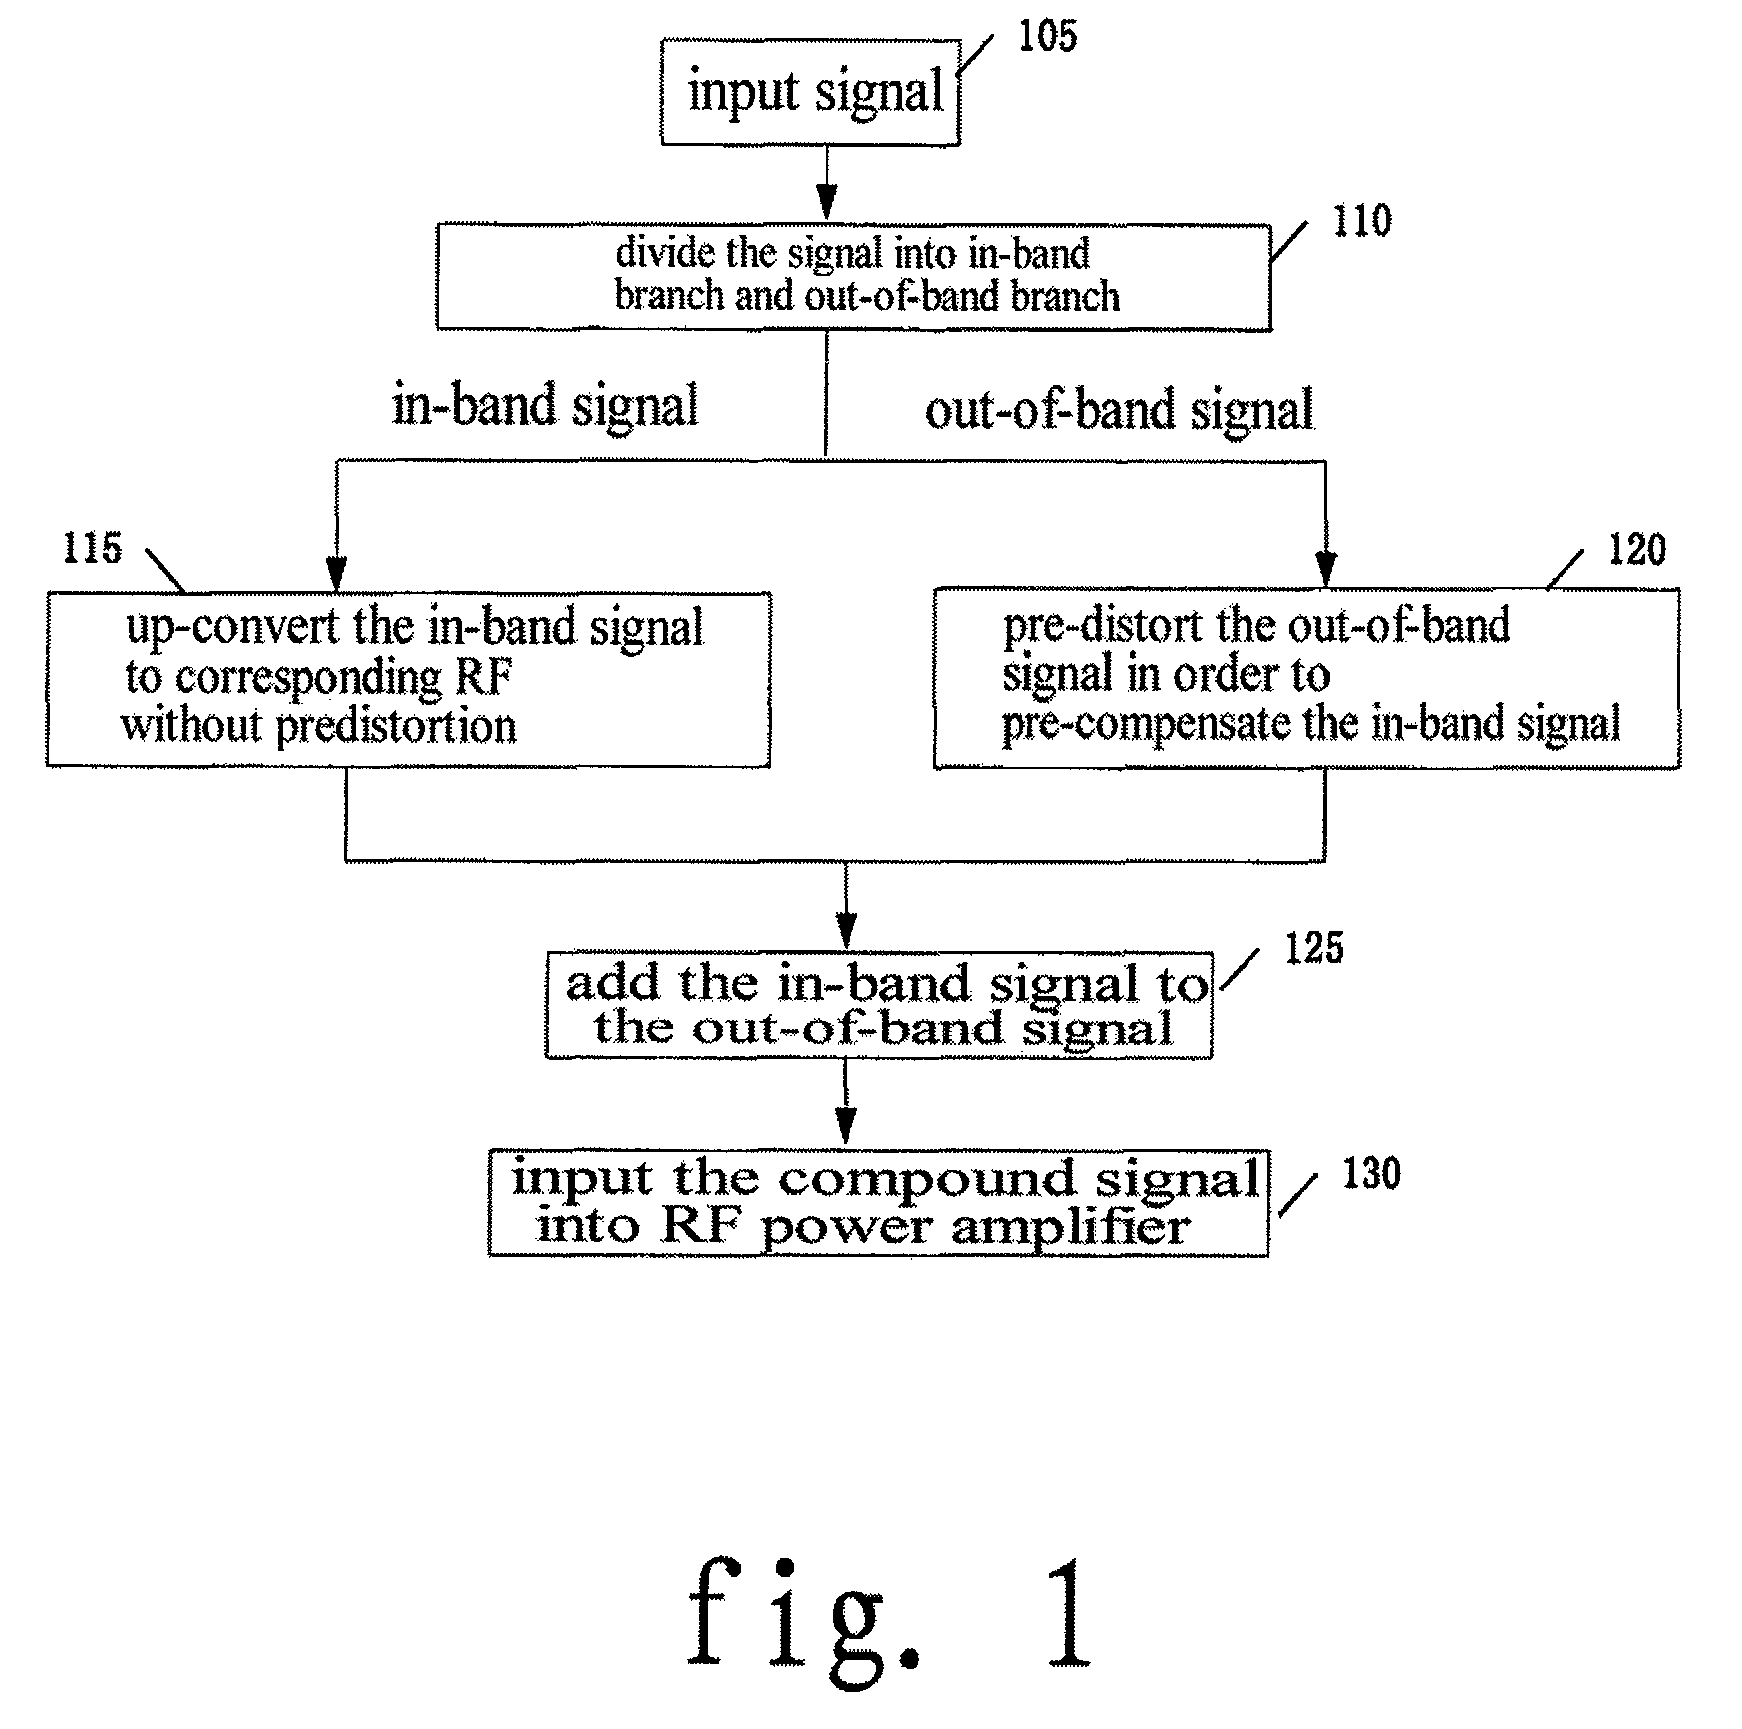 Method and system for out of band predistortion linearization